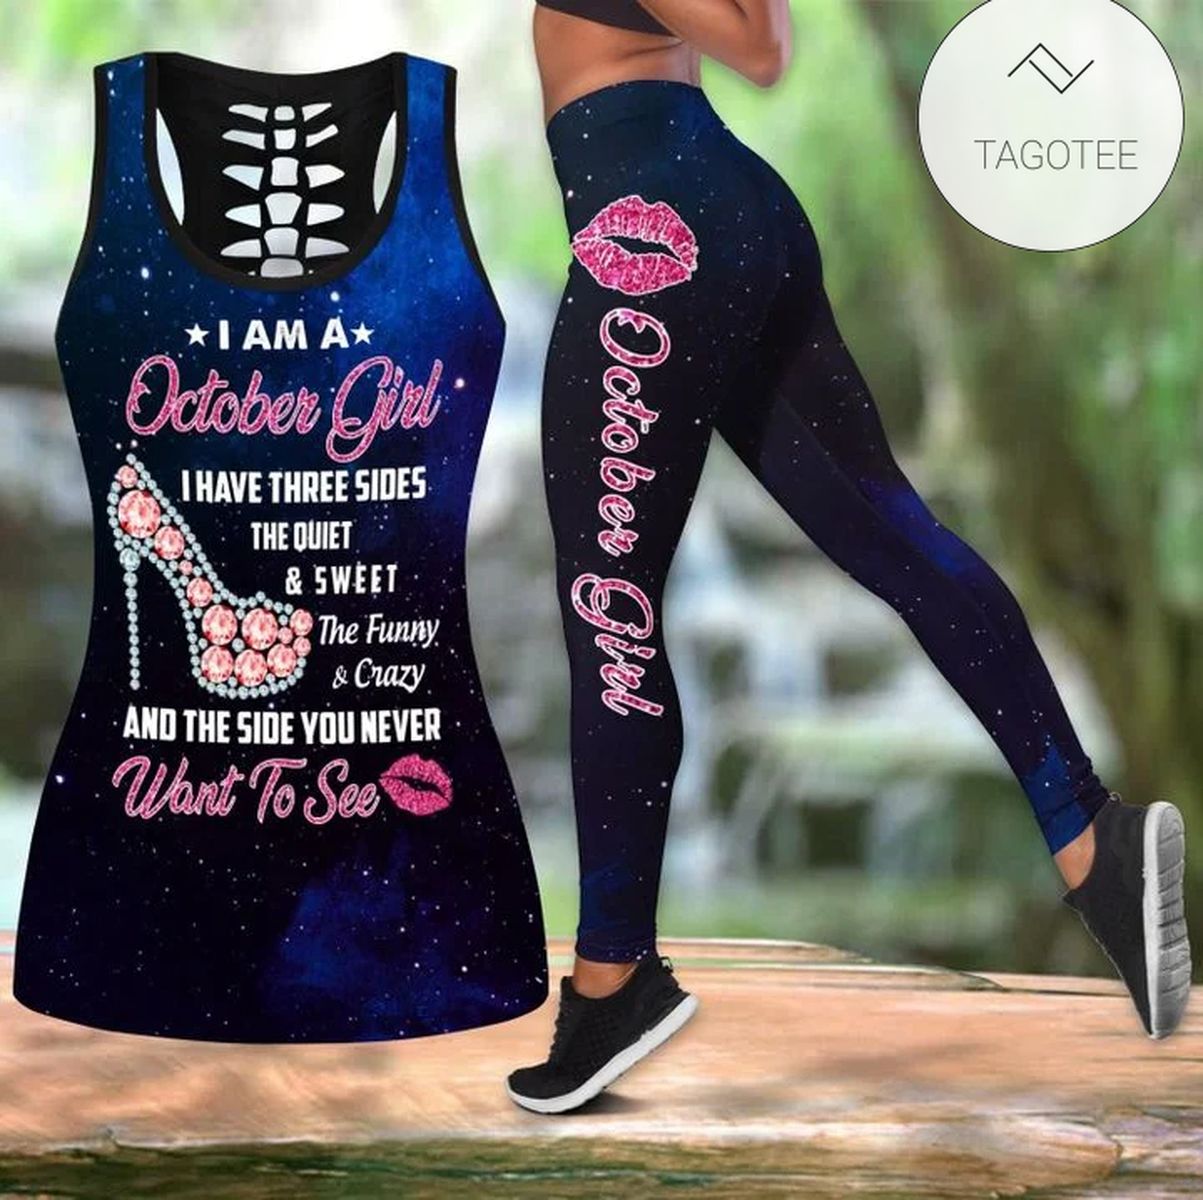 I Am A Octorber Girl I Have 3 Sides Hollow Tank Top And Leggings